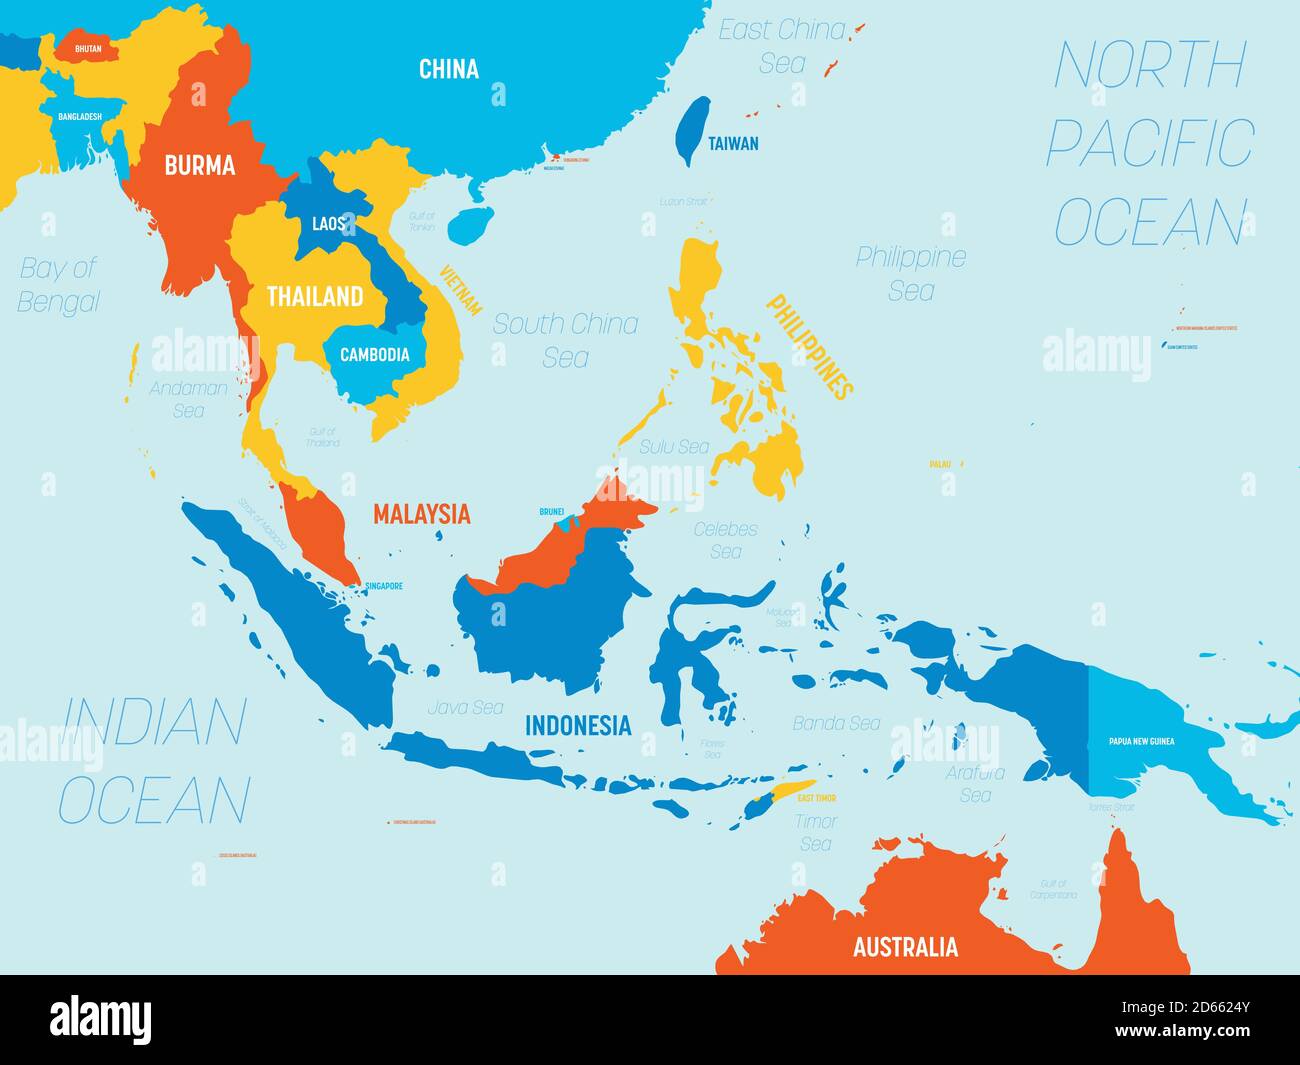 Southeast Asia map - 4 bright color scheme. High detailed political map of southeastern region with country, ocean and sea names labeling. Stock Vector